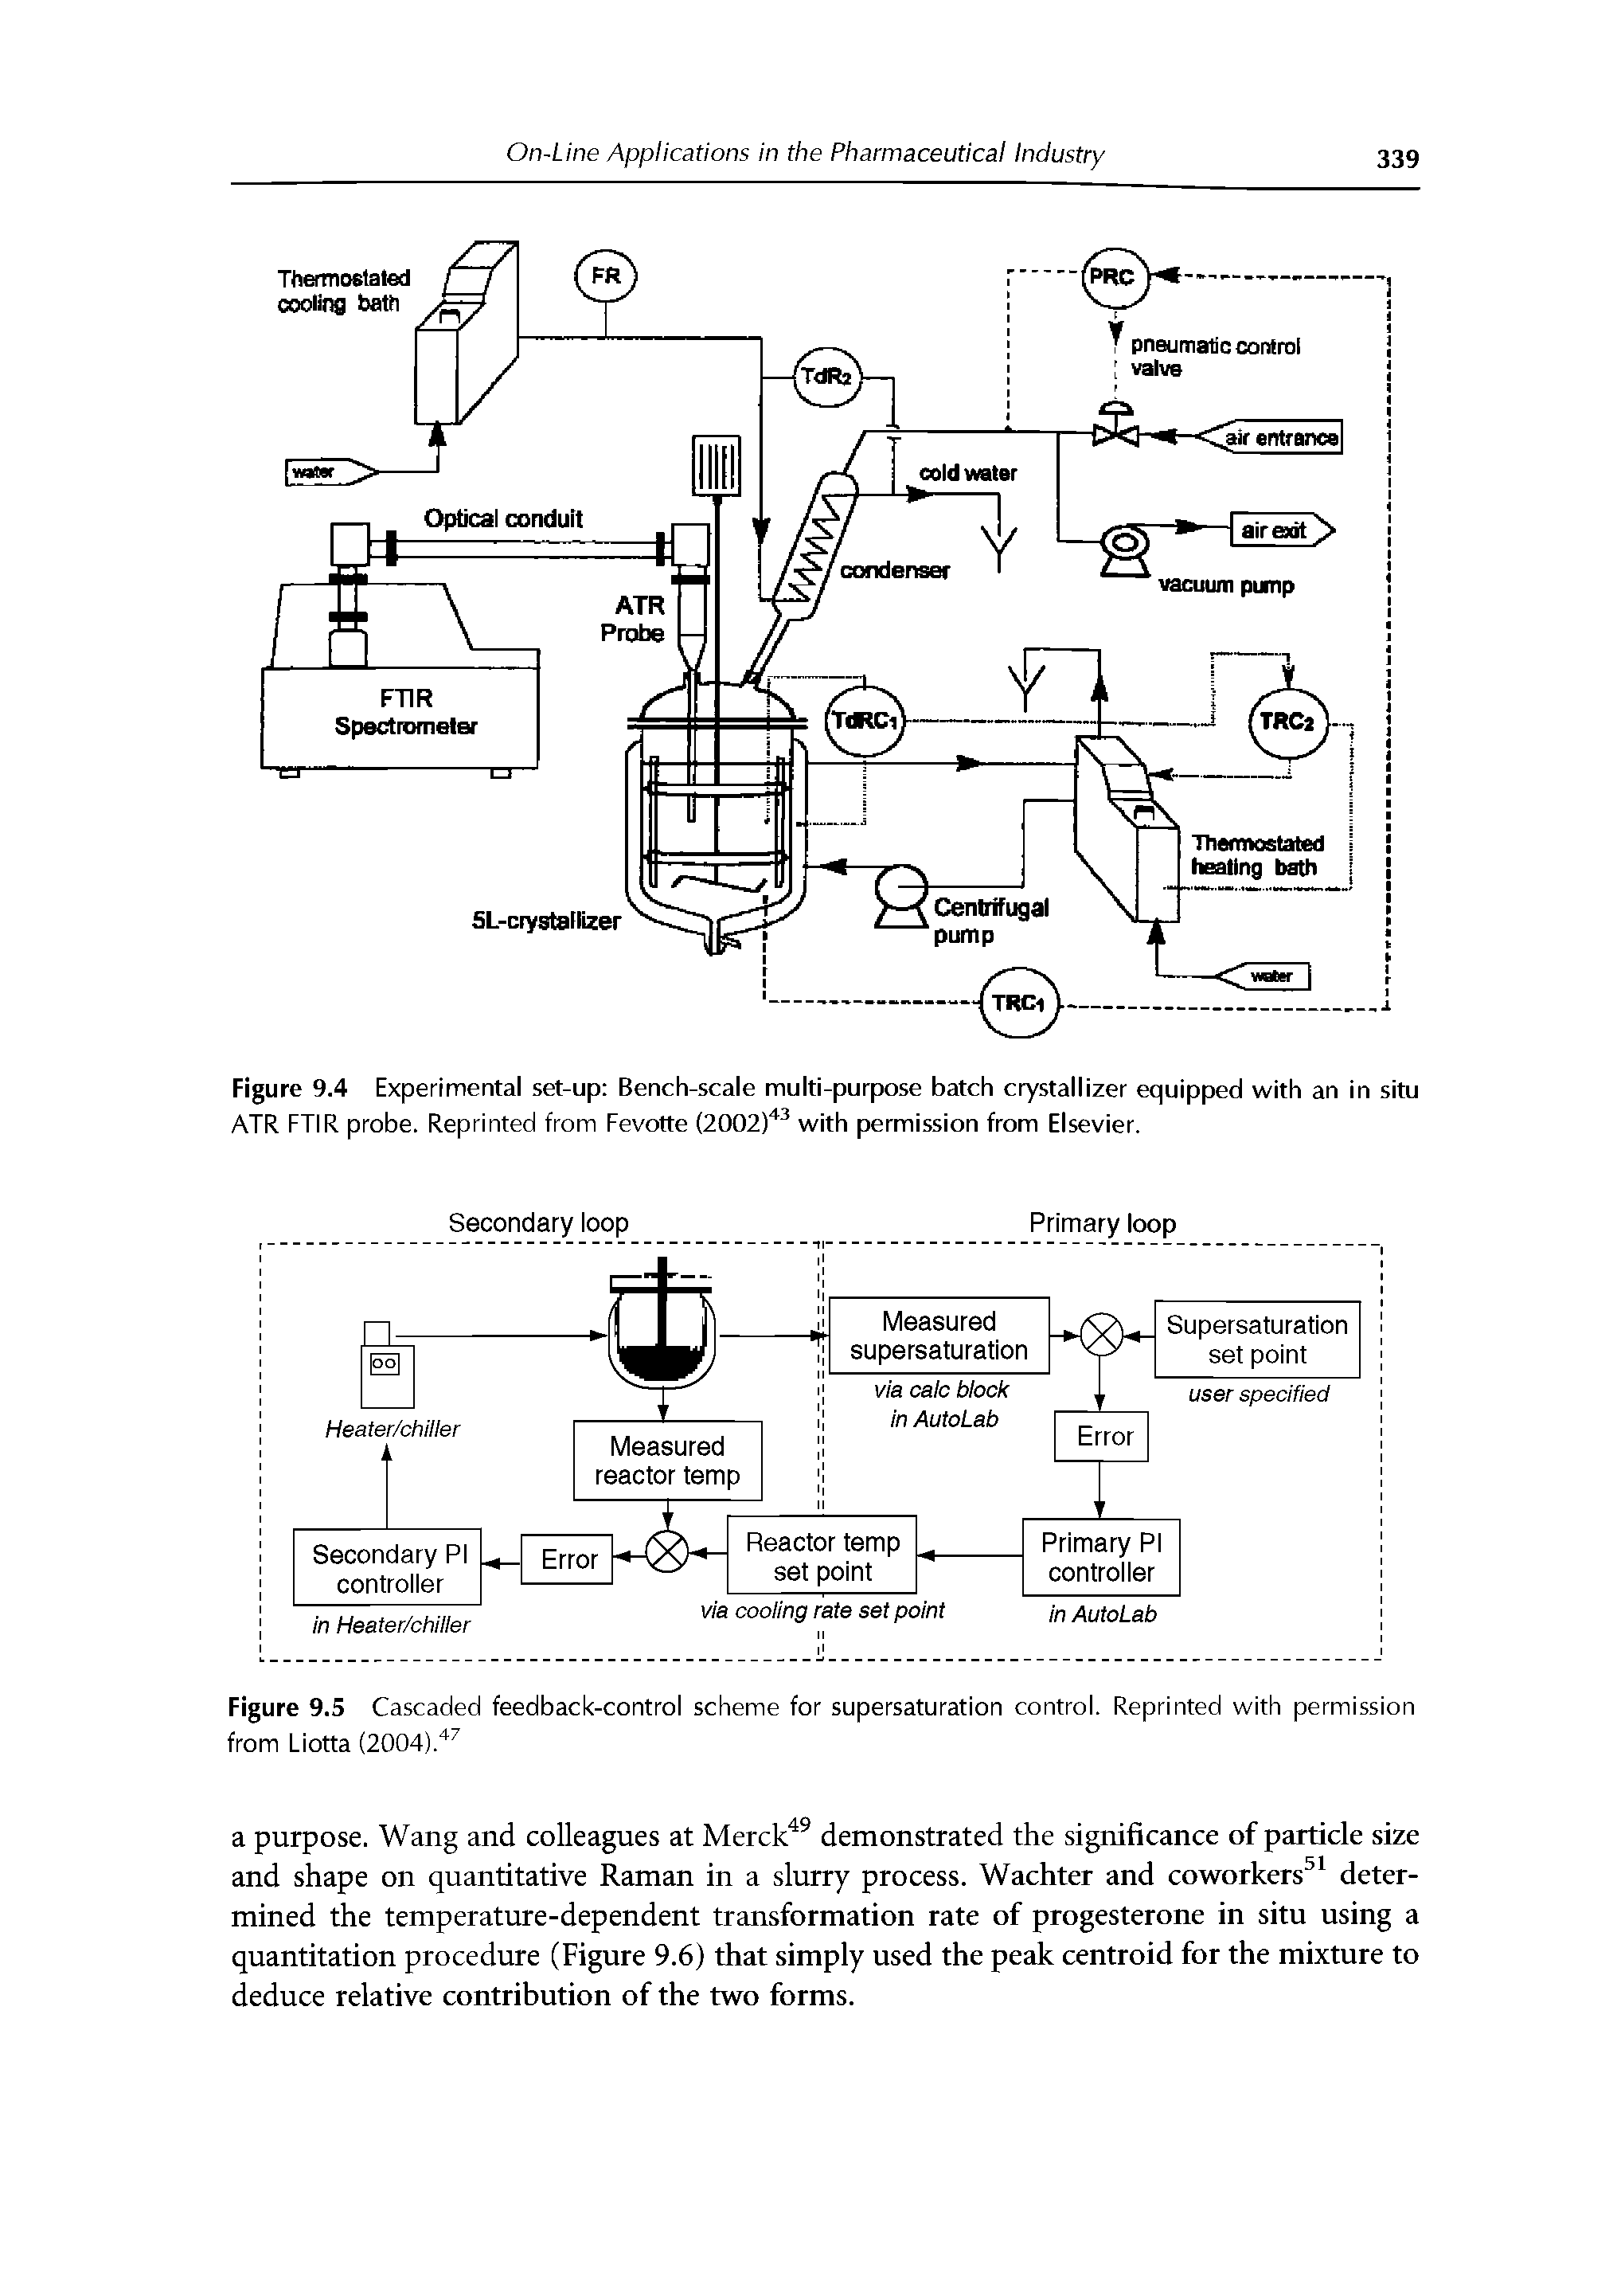 Figure 9.4 Experimental set-up Bench-scale multi-purpose batch crystallizer equipped with an in situ ATR FTIR probe. Reprinted from Fevotte (2002)43 with permission from Elsevier.